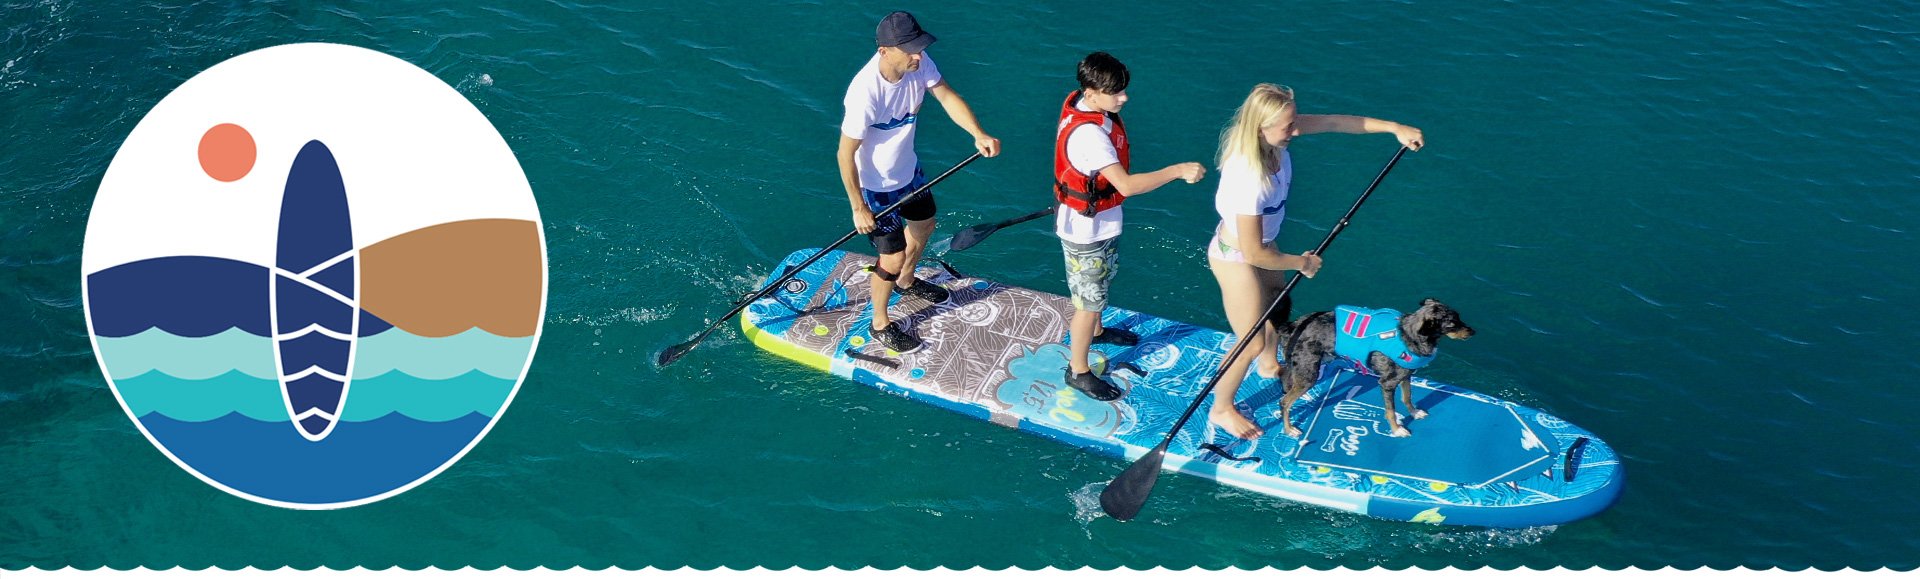 TEAM SUP Boards